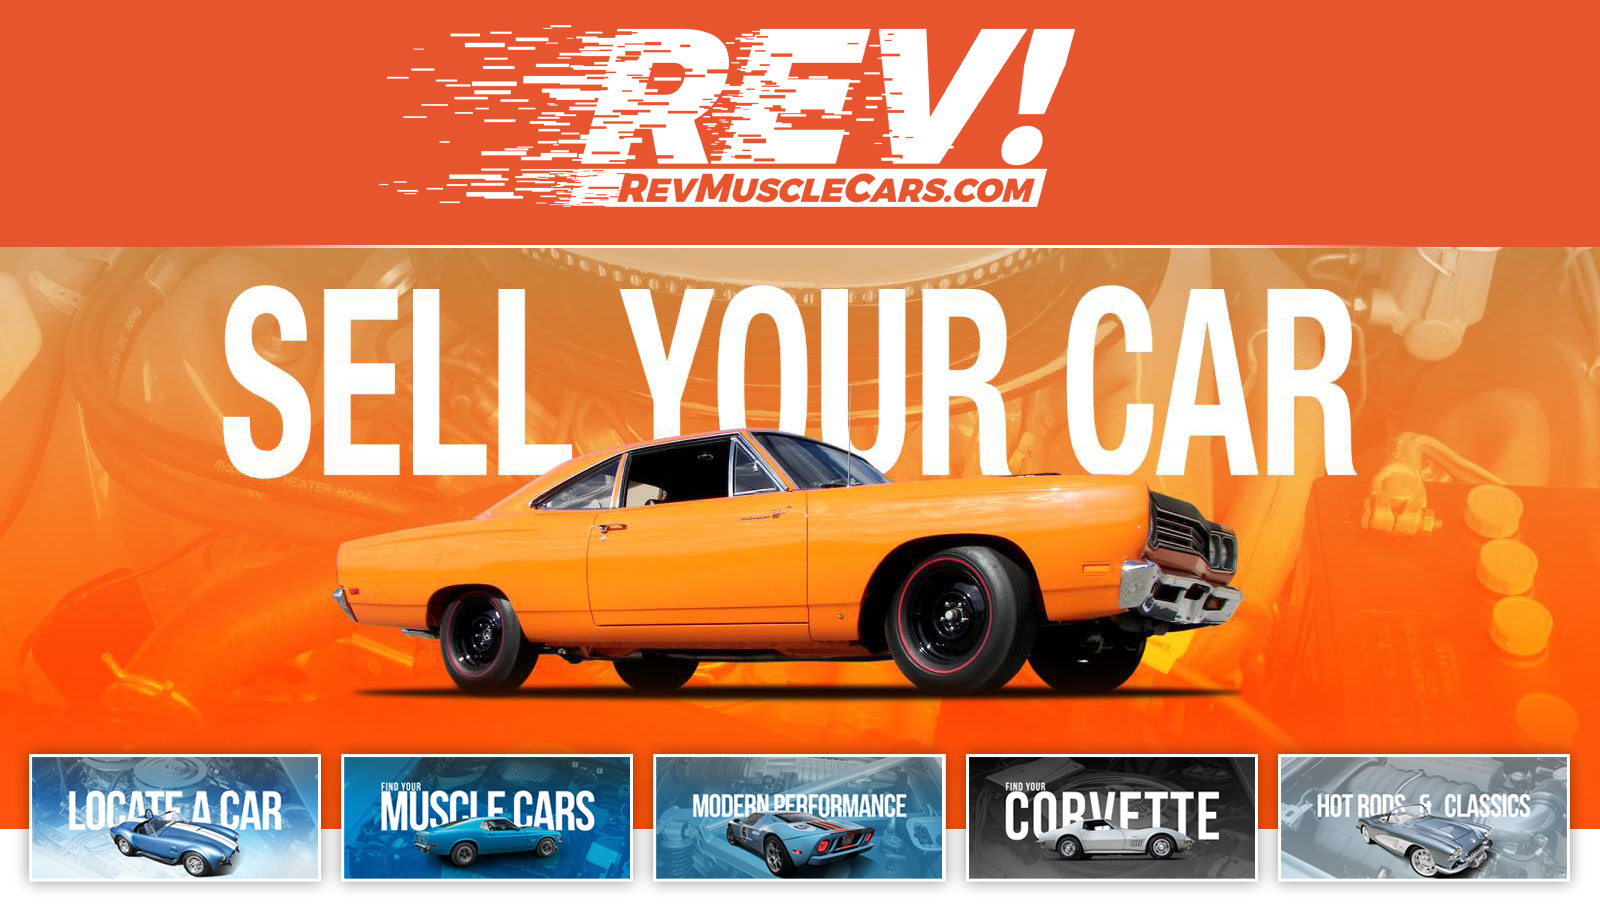 Rev Muscle Cars